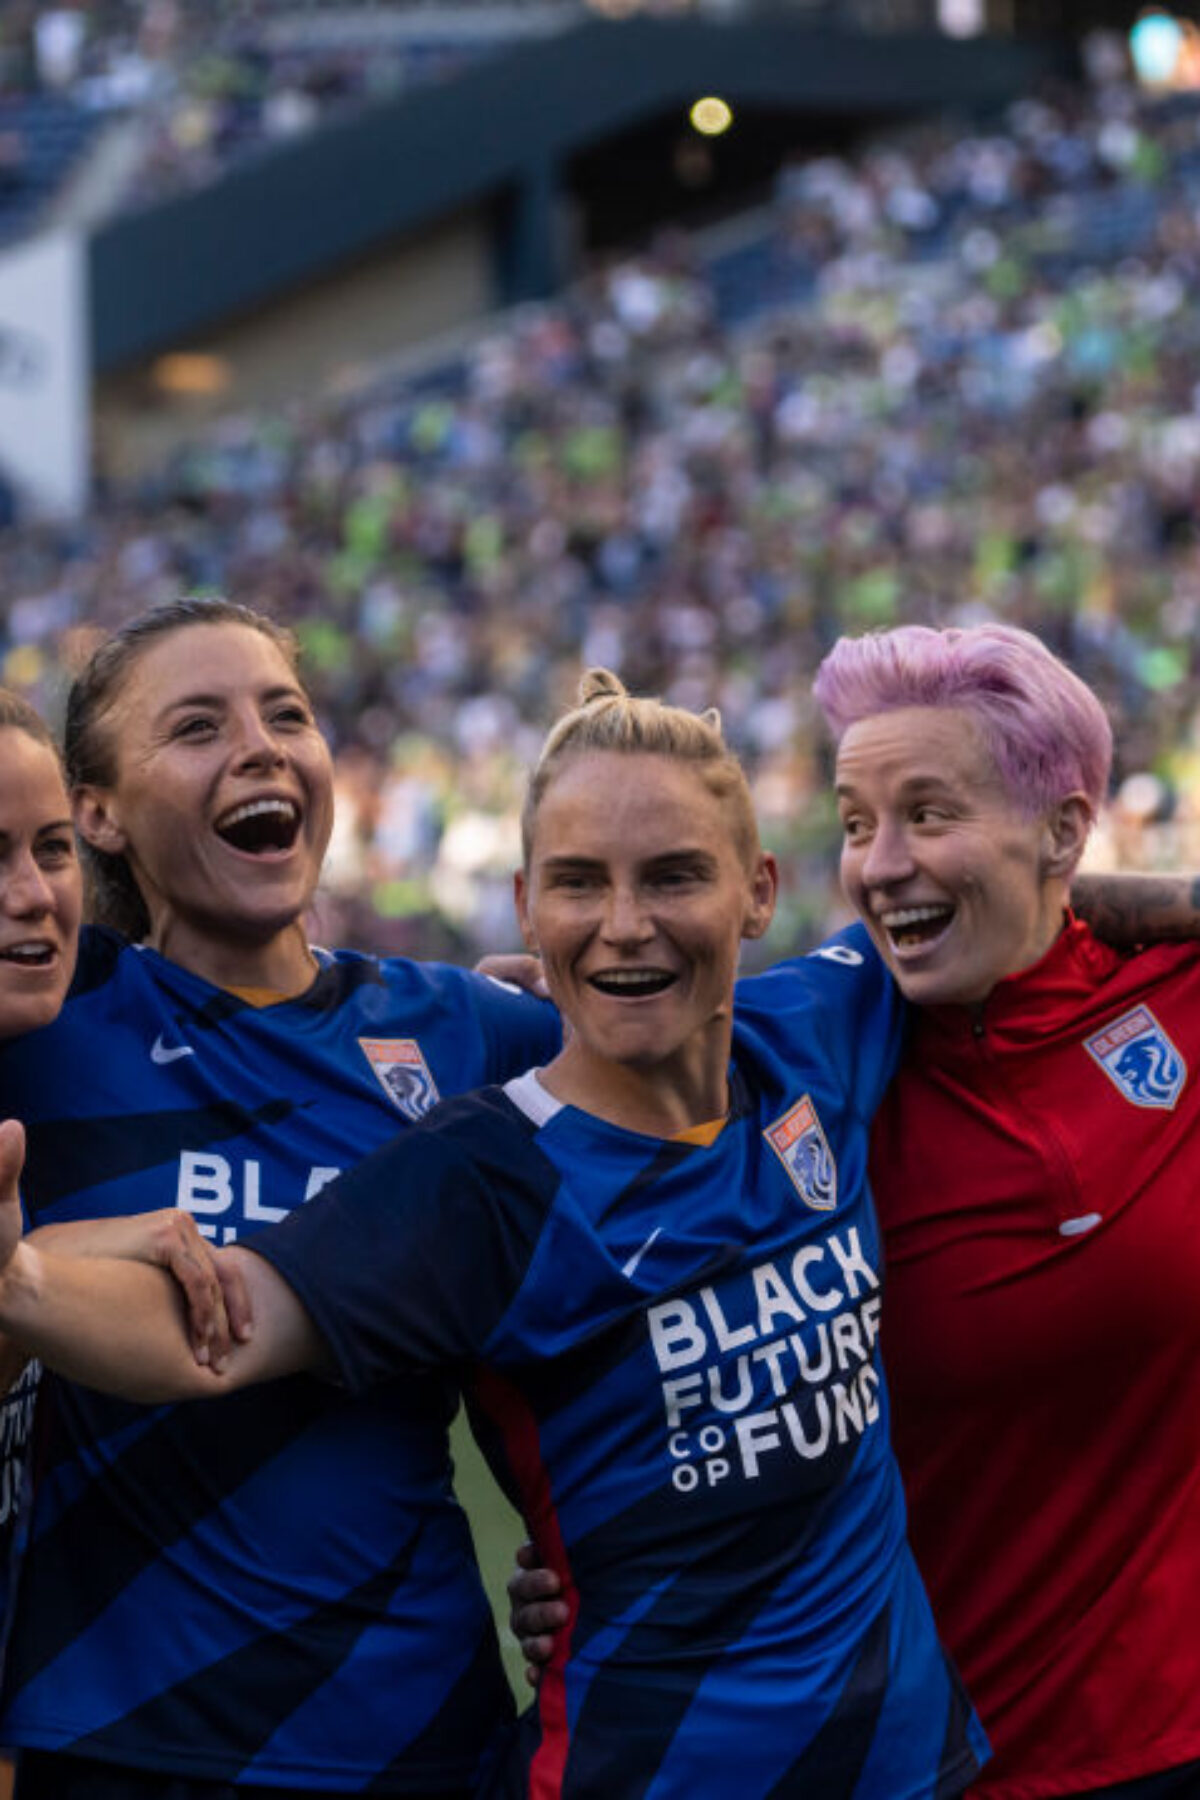 SEATTLE, WA - AUGUST 29: OL Reign Lauren Barnes #3, Sofia Huerta #11, Jessica Fishlock #10 and Megan Rapinoe #15 celebrate after a game between Portland Thorns FC and OL Reign at Lumen Field on August 29, 2021 in Seattle, Washington. (Photo by Stephen Brashear/ISI Photos/Getty Images)